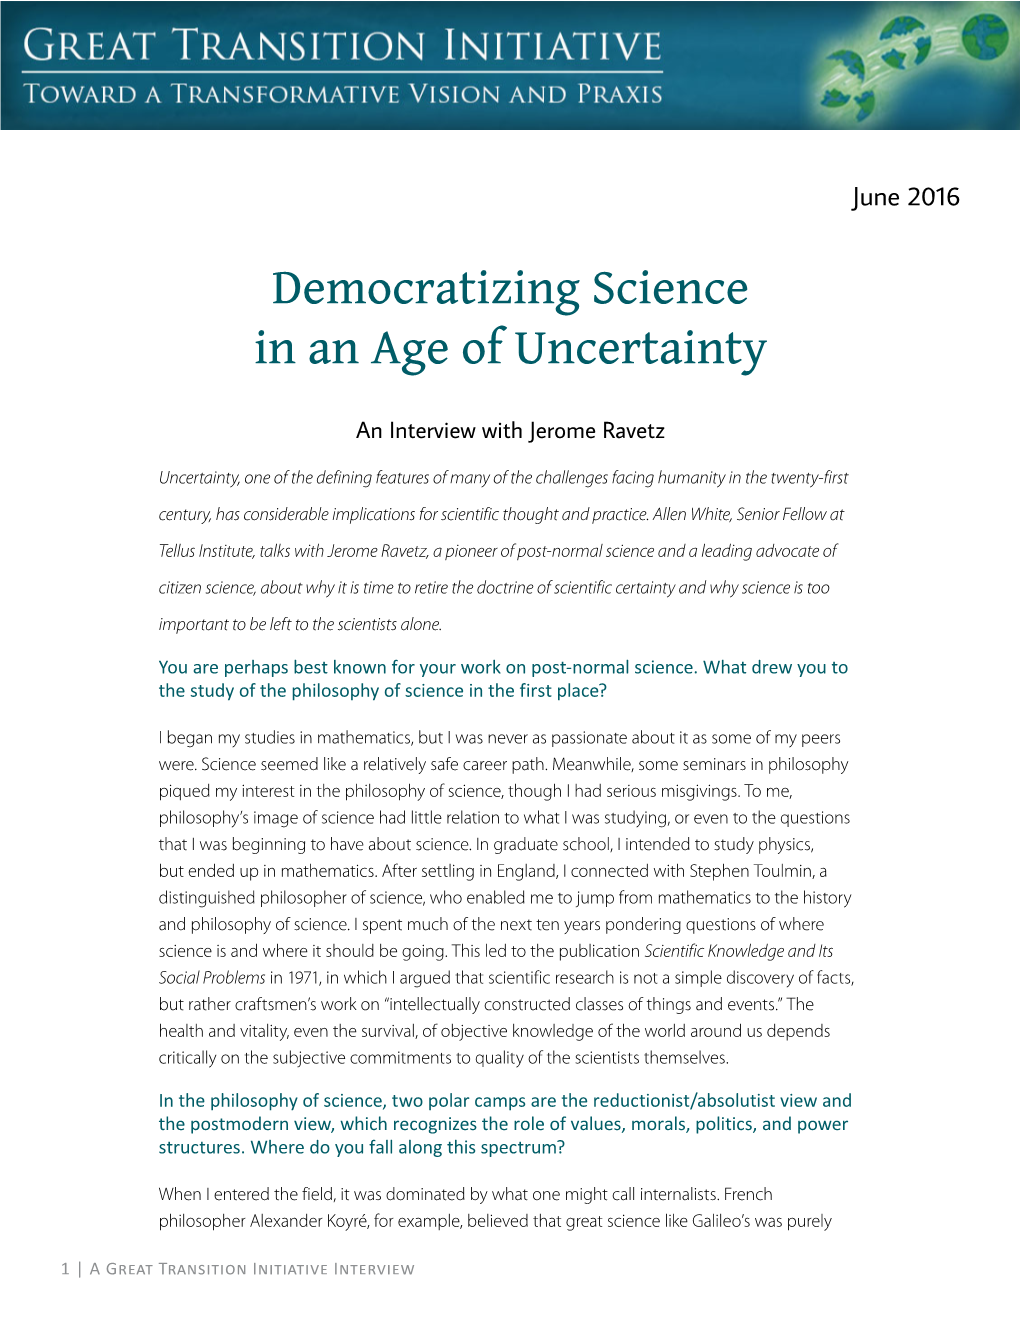 Democratizing Science in an Age of Uncertainty